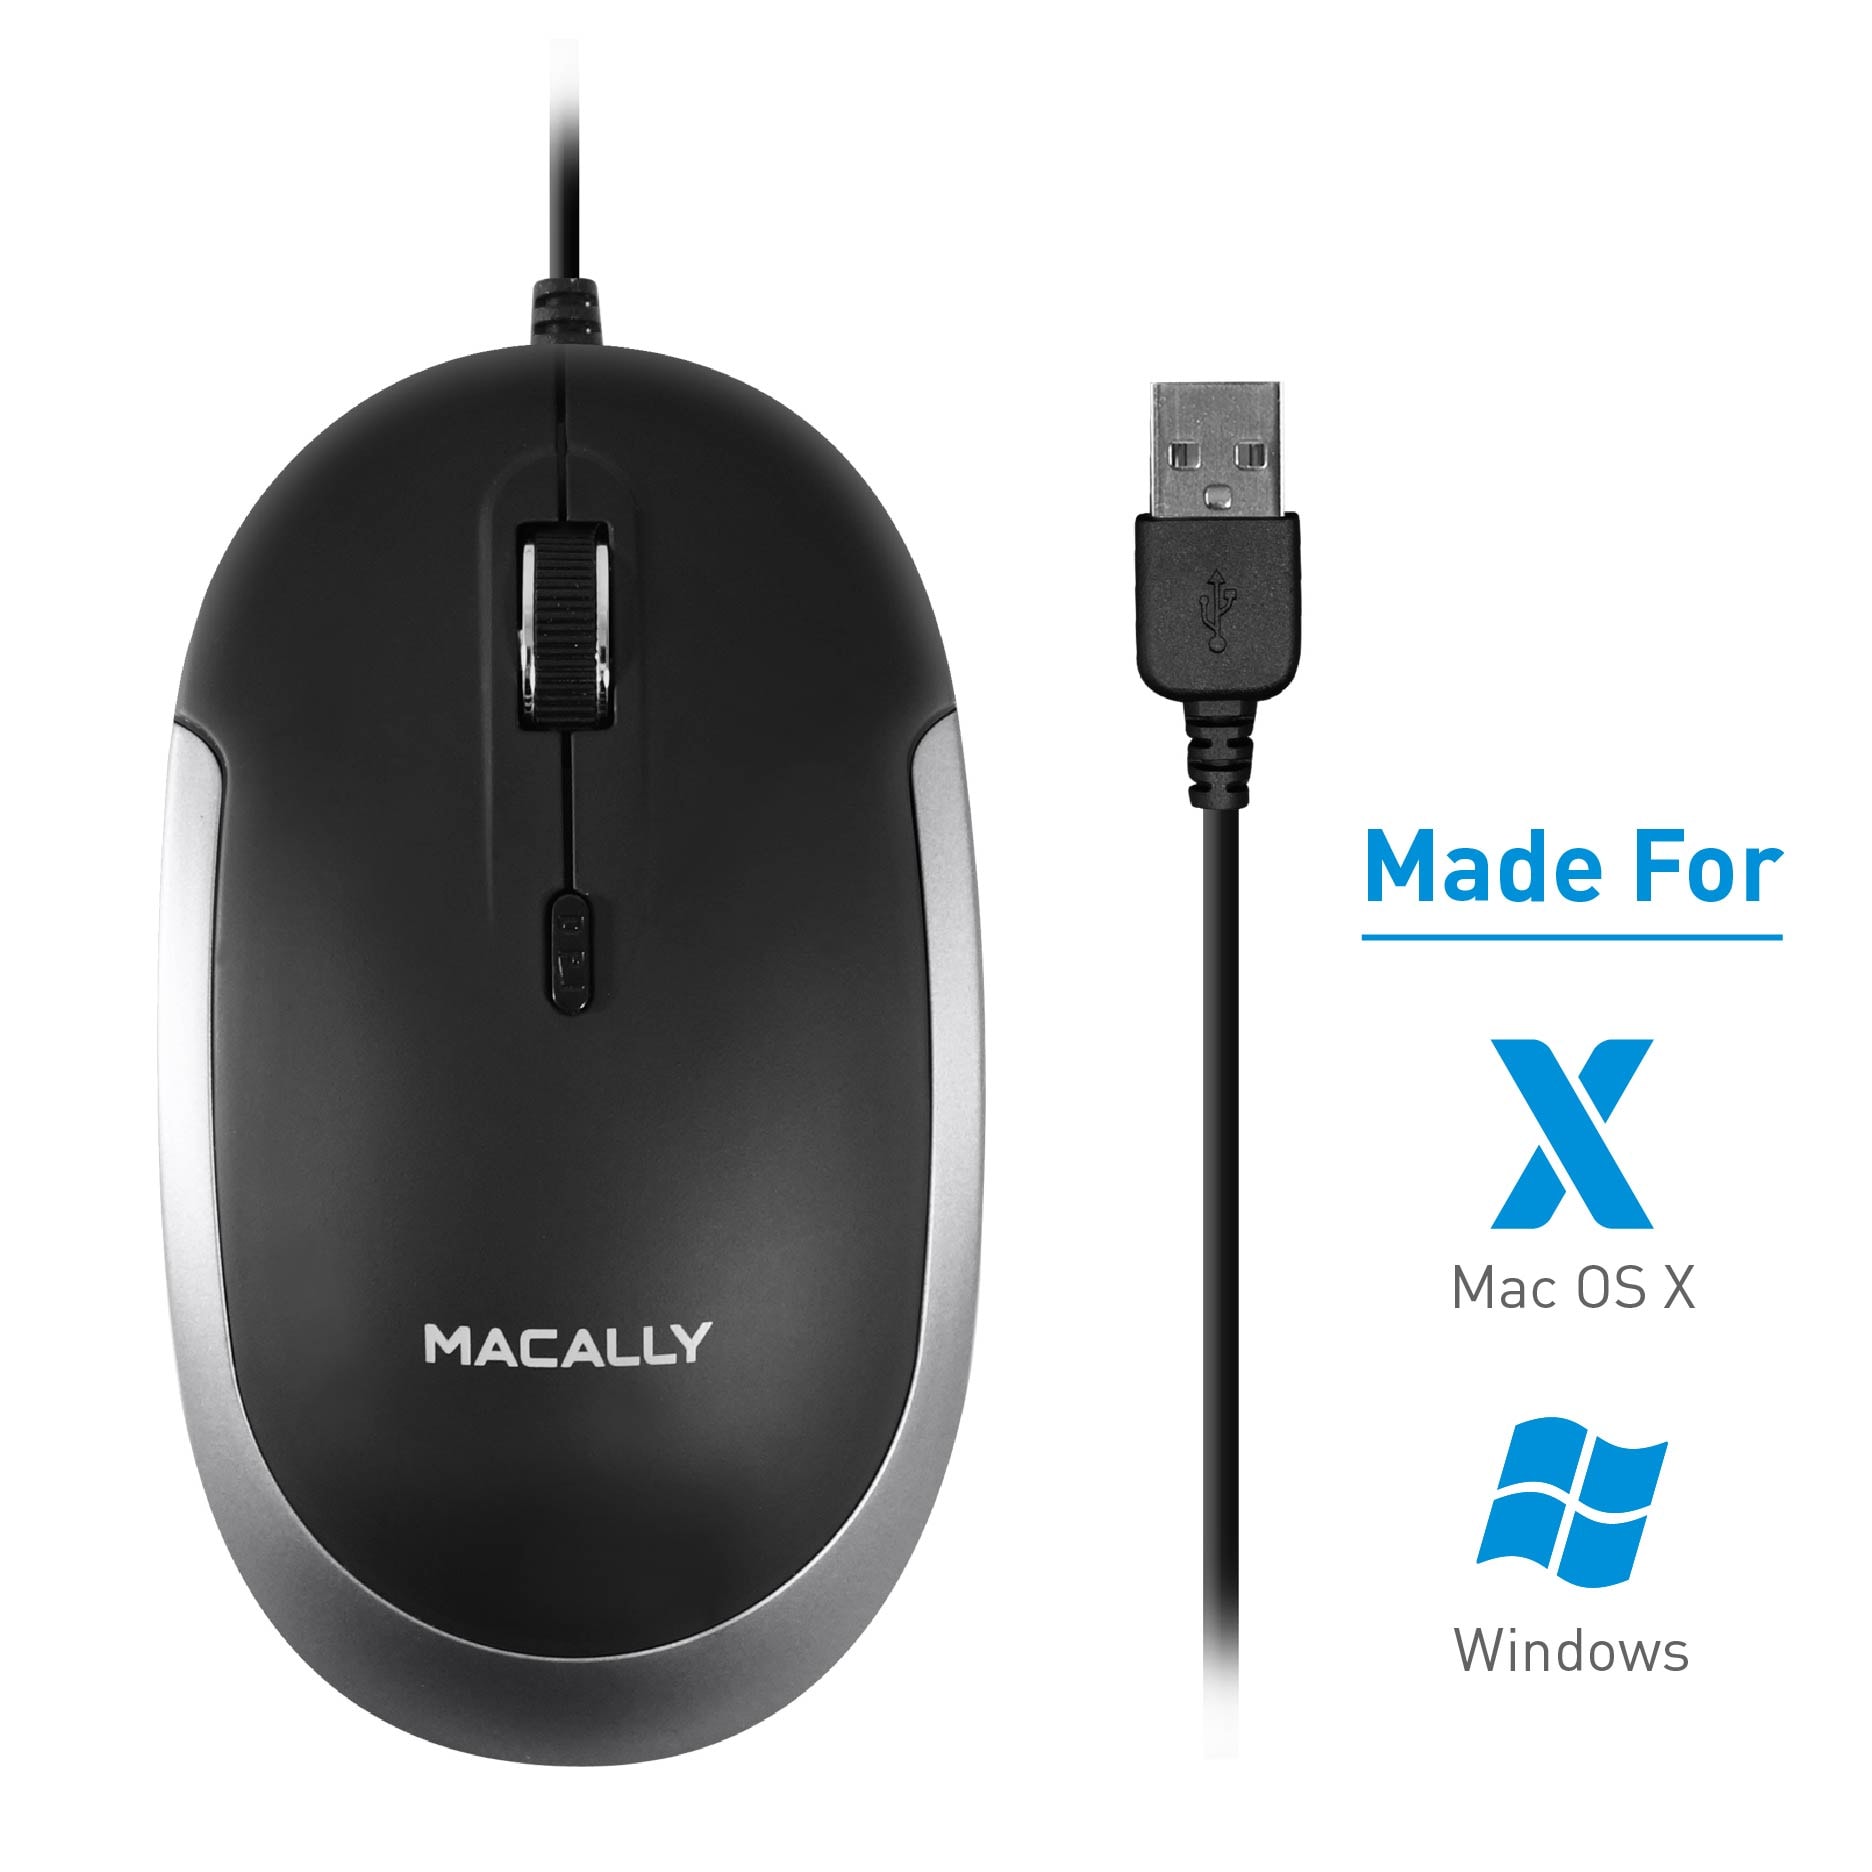 Macally Macally Silent USB Mouse Wired for Apple Mac or Windows PC Laptop/Desktop Computer | Slim and Compact Mice Design Sensor and DPI Switch 800/1200/1600/2400 | Small for Easy Travel (